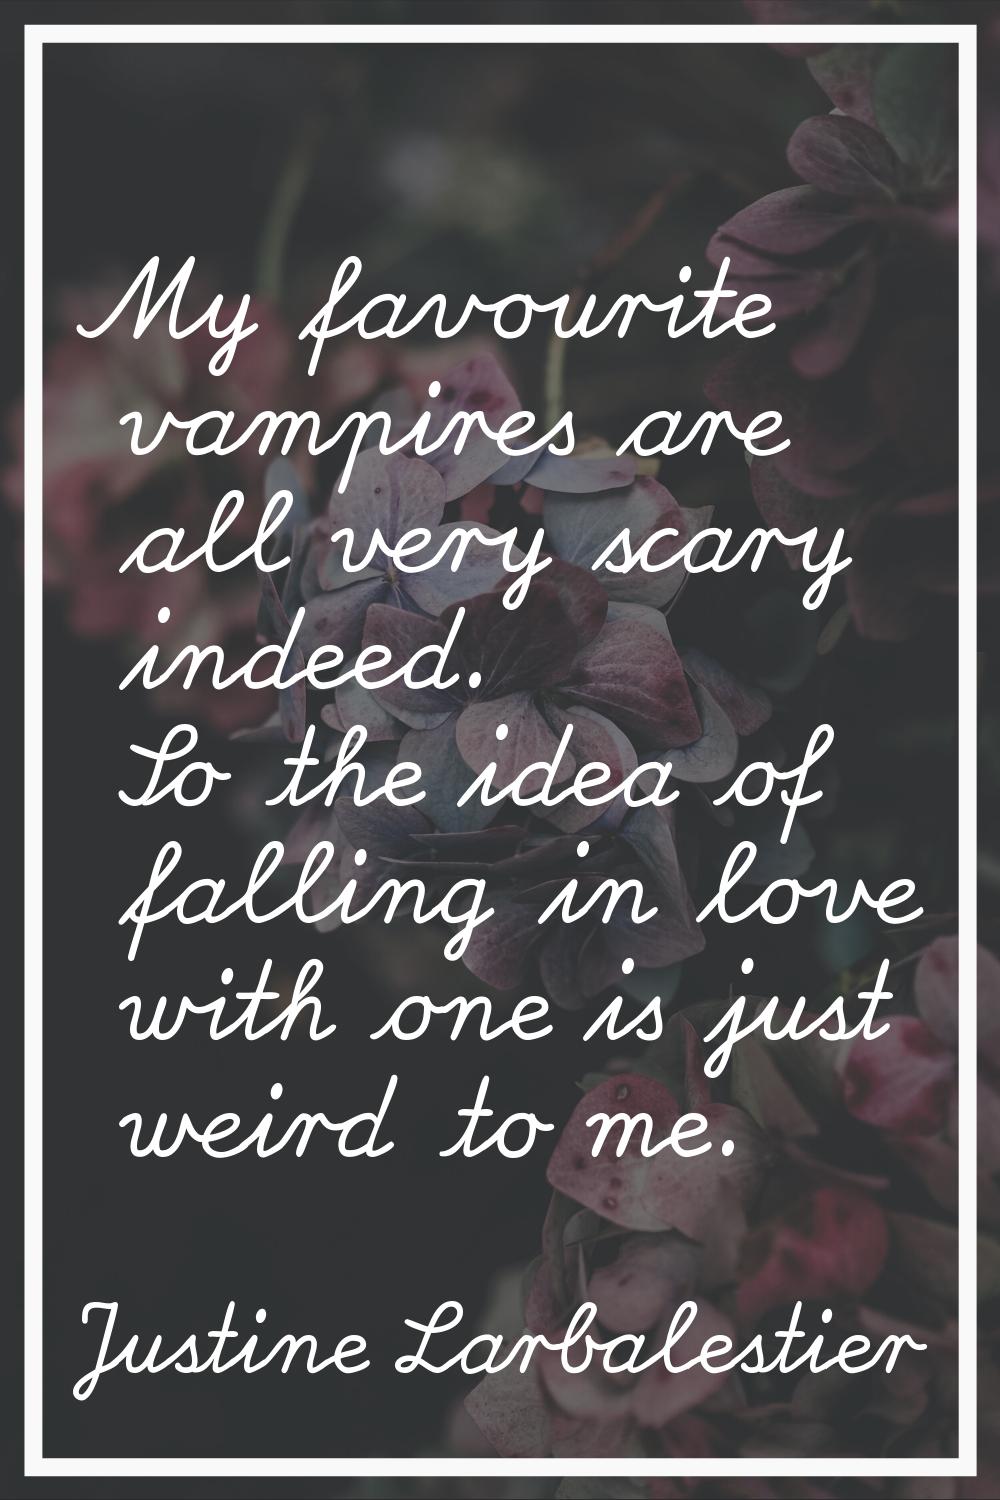 My favourite vampires are all very scary indeed. So the idea of falling in love with one is just we